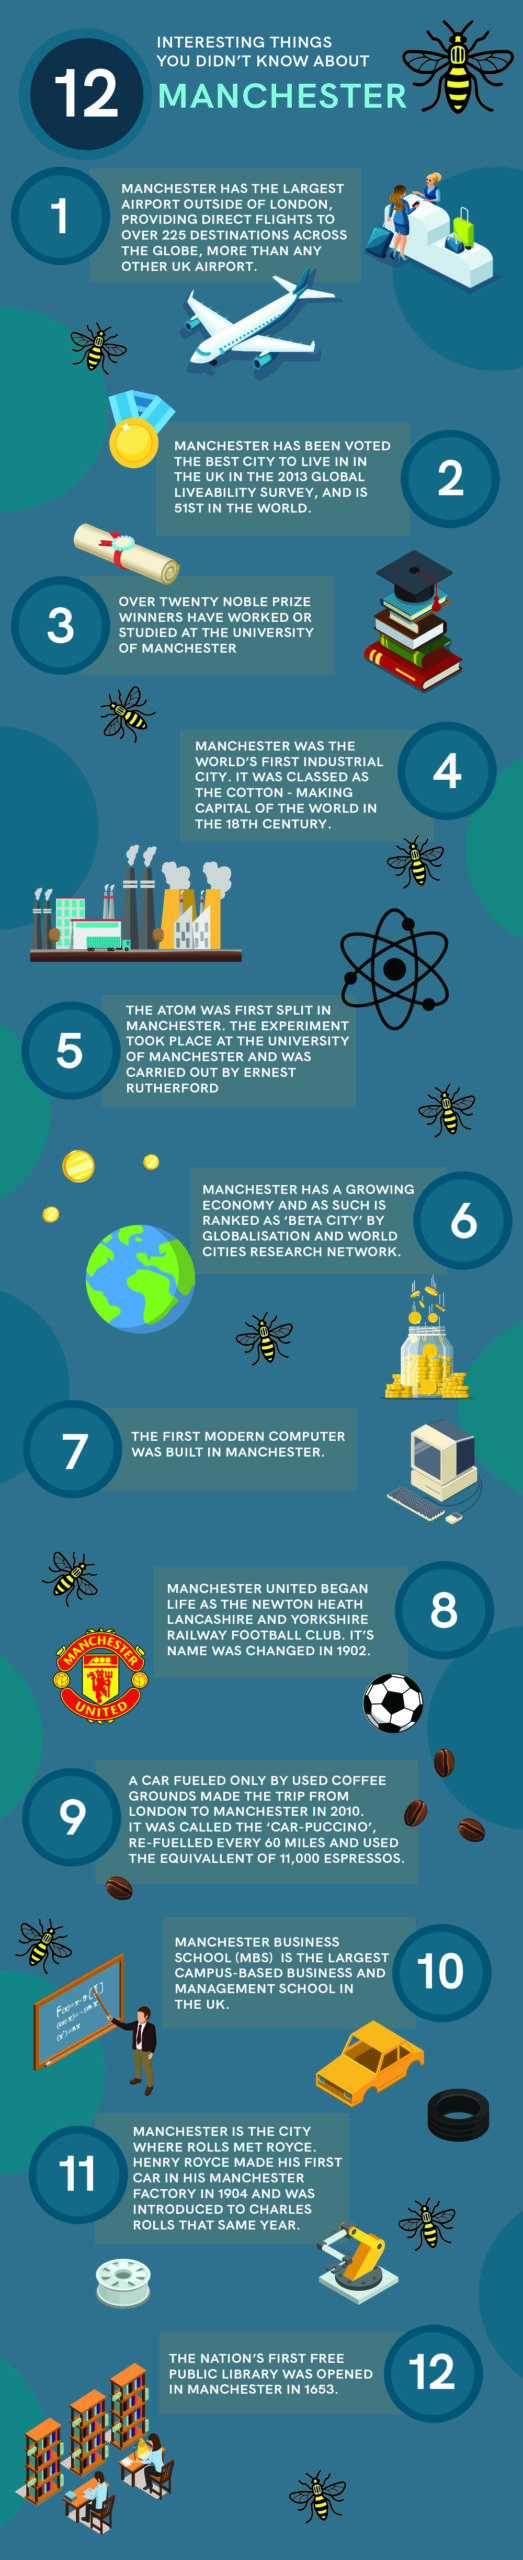 12 Interesting Things You Didn’t Know About Manchester infographic